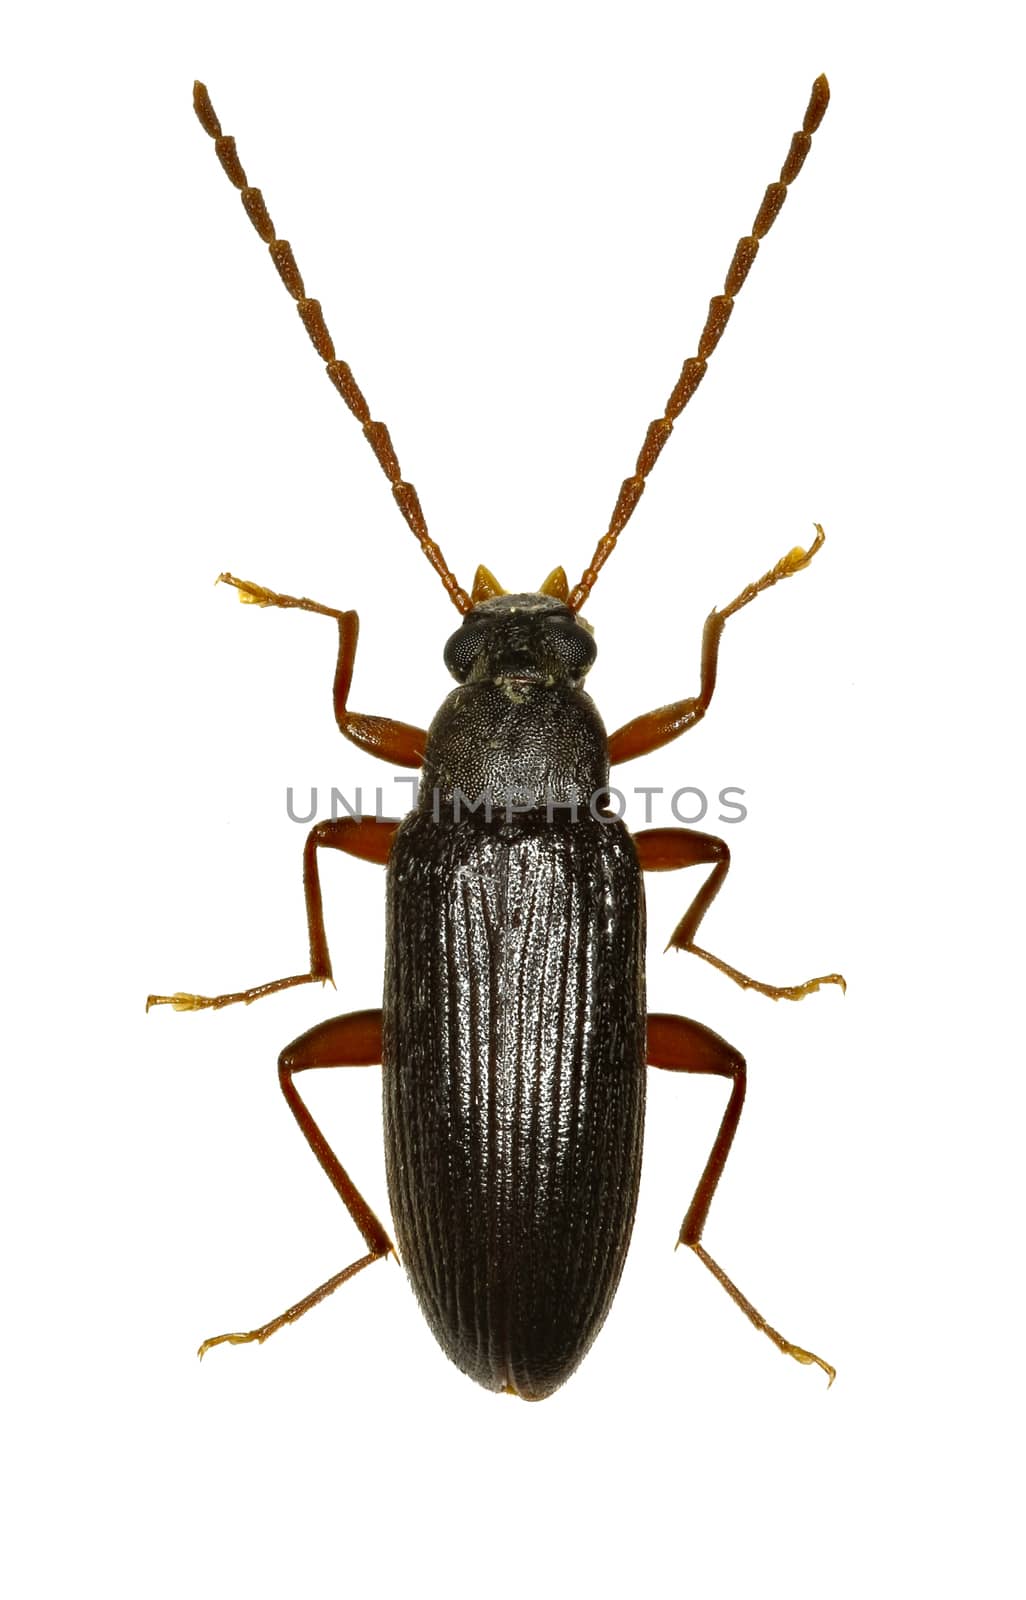 Comb-clawed Beetle Allecula on white Background  -  Allecula morio (Fabricius, 1787) by gstalker